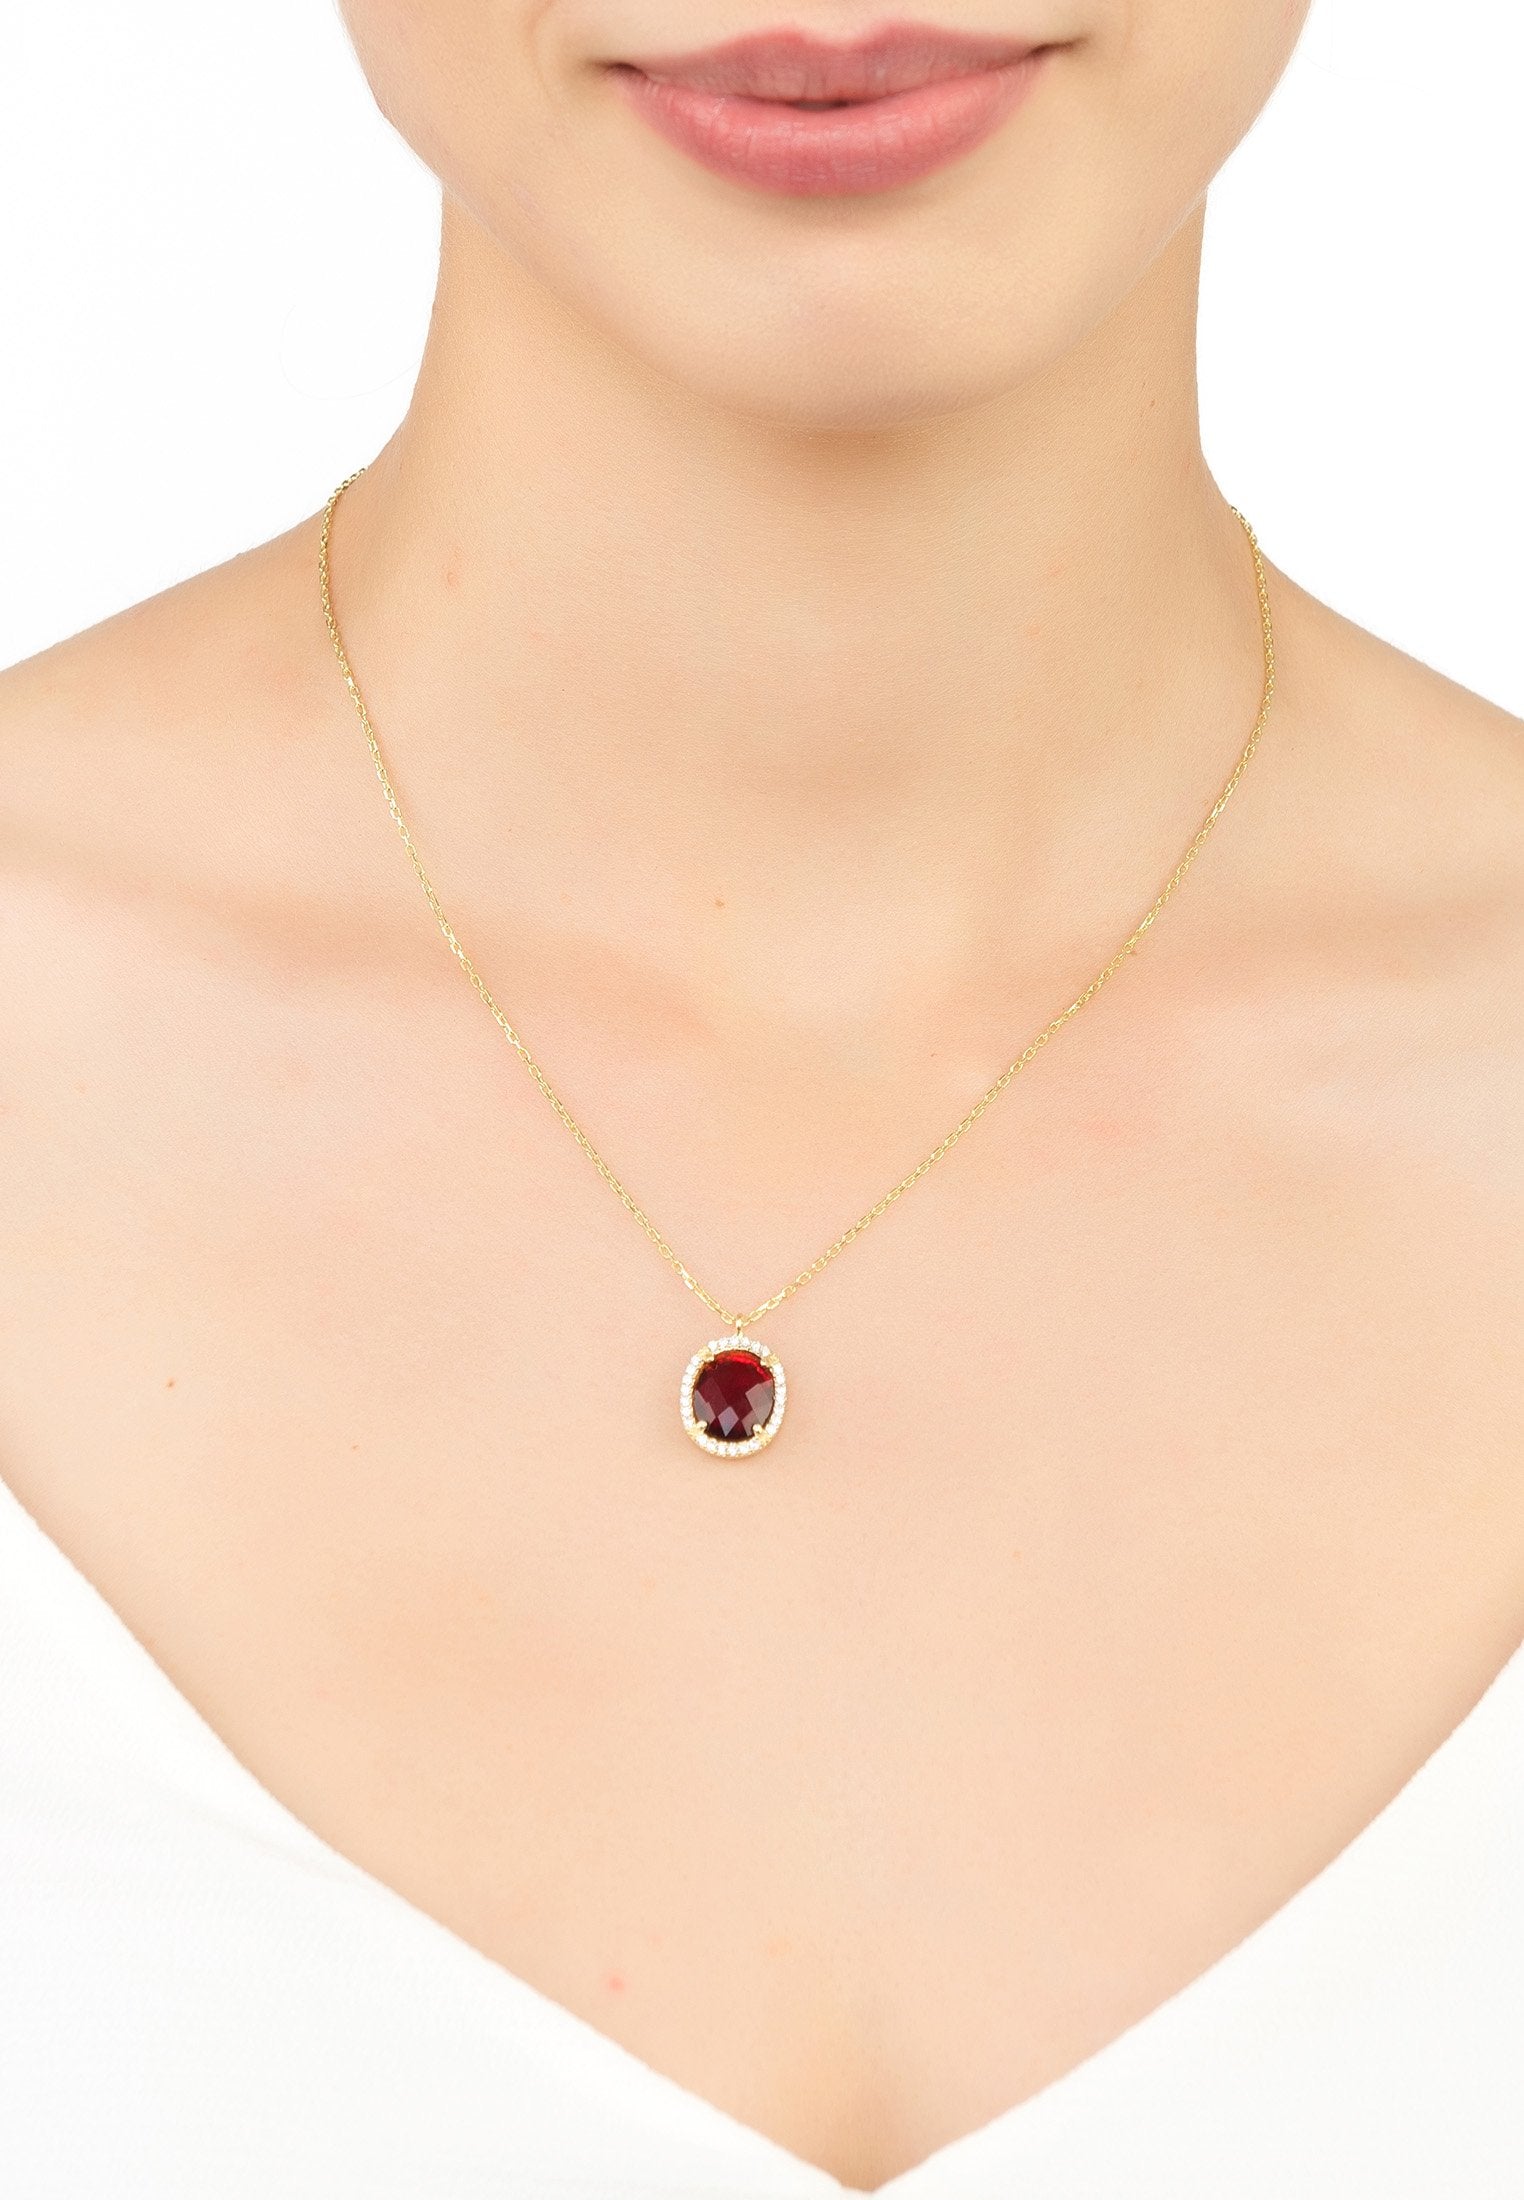 Regal Oval Garnet Pendant Necklace with CZ Detailing in Gold - Jewelry & Watches - Bijou Her -  -  - 